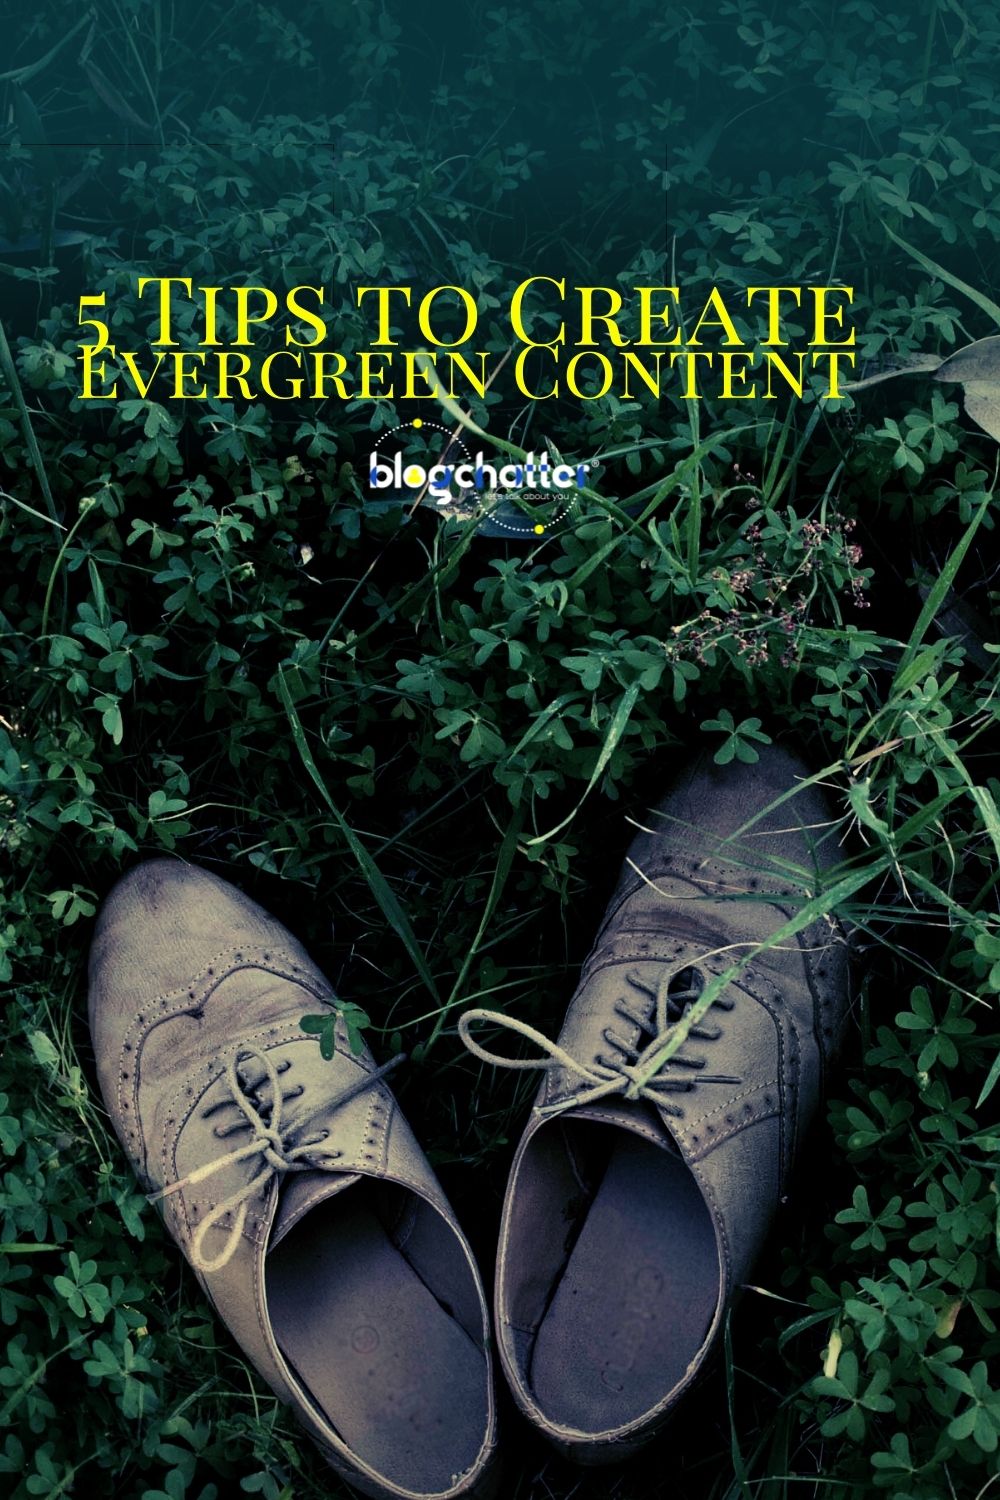 5 Tips to Create Evergreen Content